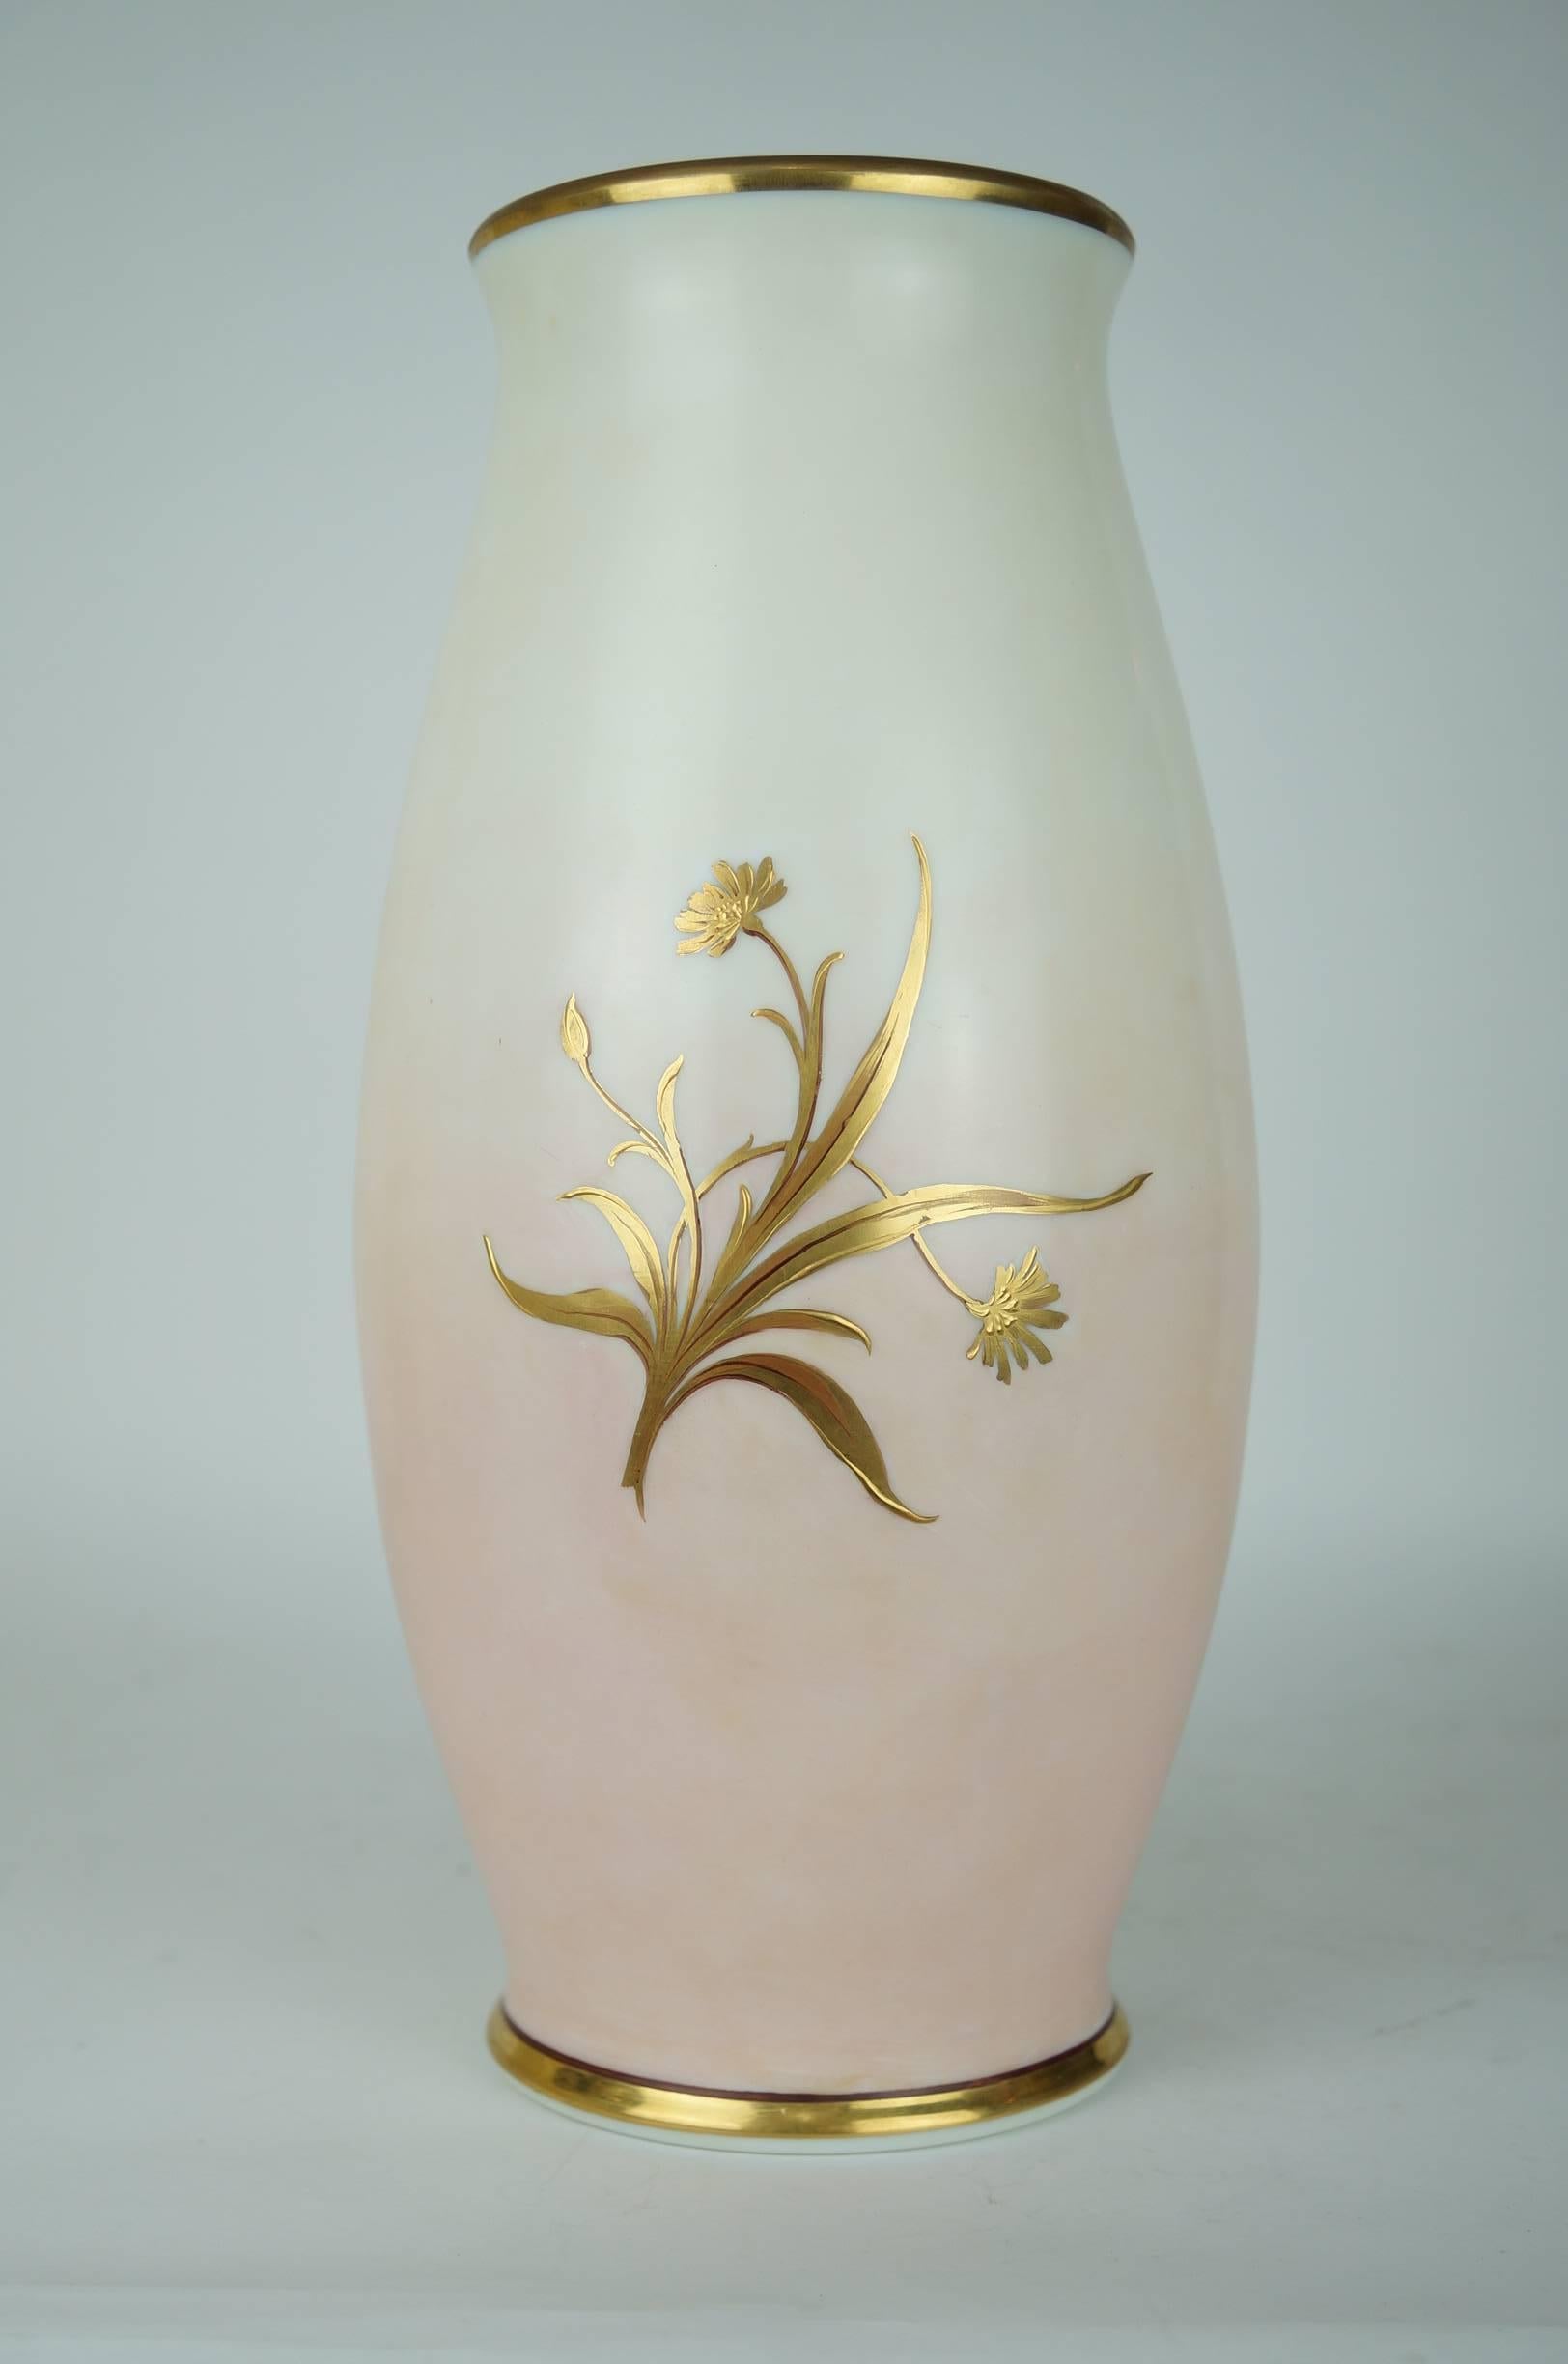 A Wonderful Painted Porcelain Art Nouveau Neoclassical Vase with Lady Releasing a Bird
Stock Number: PP10